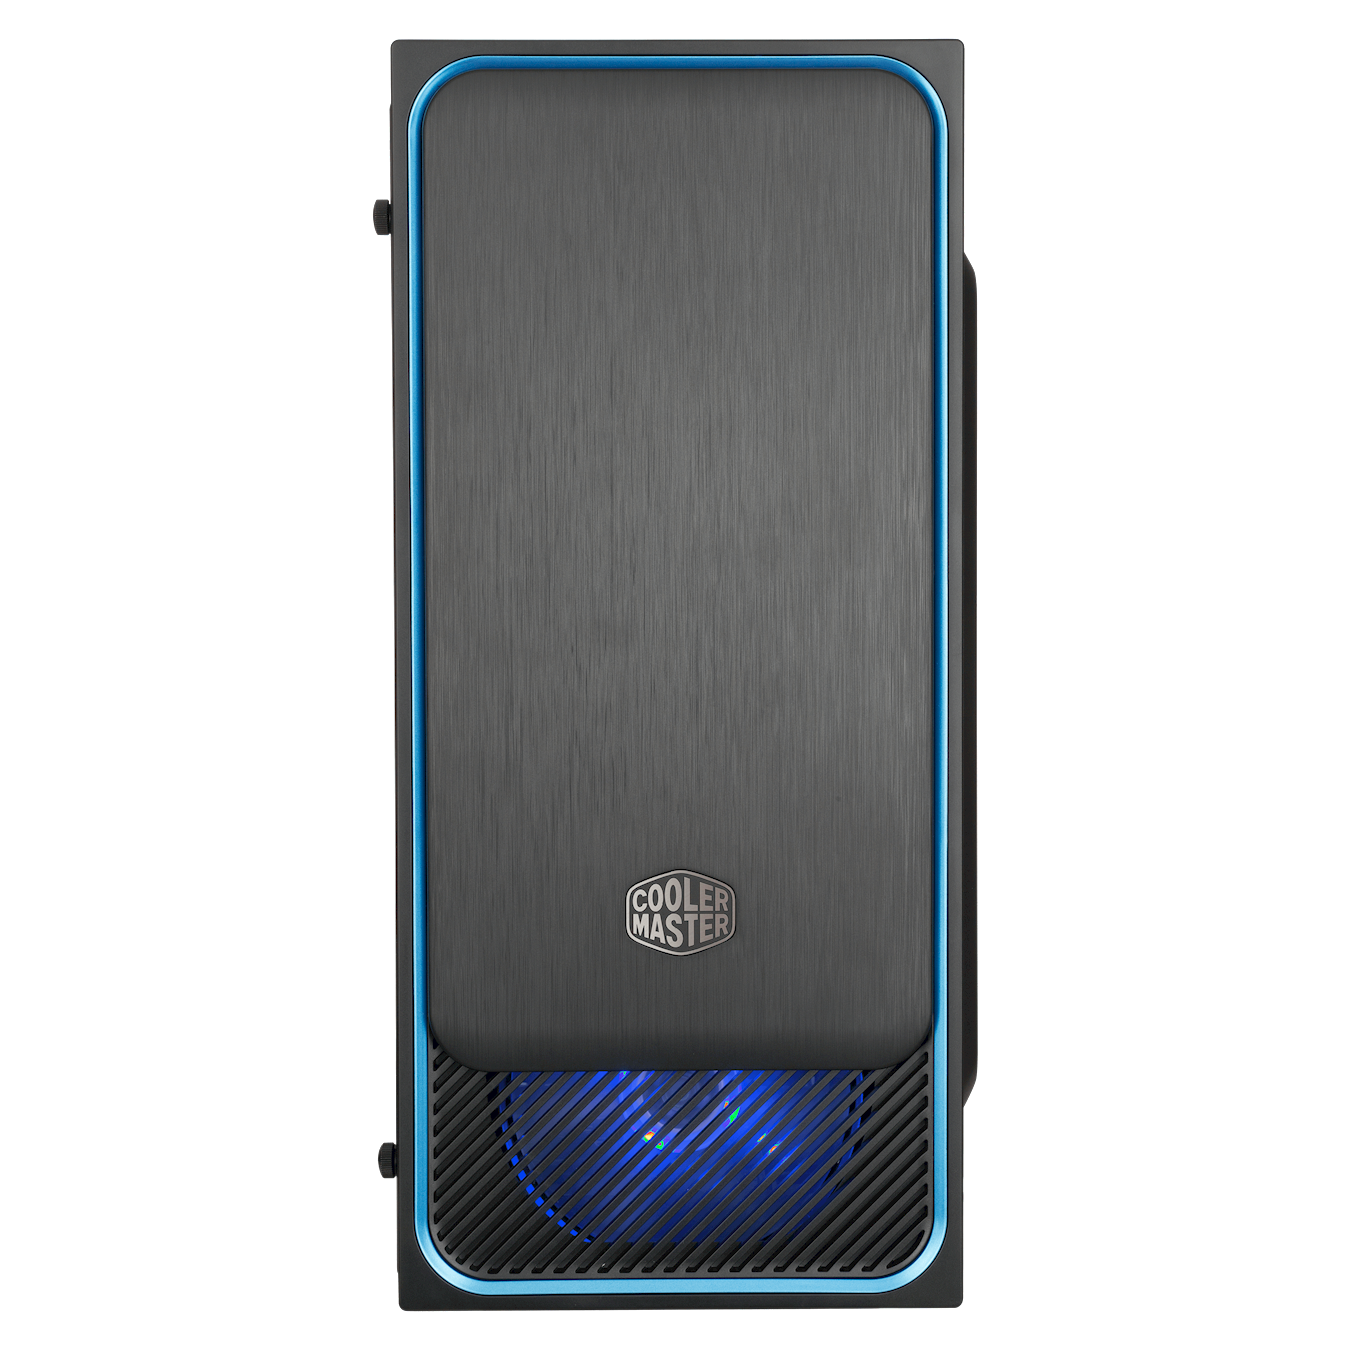 MasterBox E500L (Side Window Panel Version) Mid Tower Case - Sliding front panel at the Top